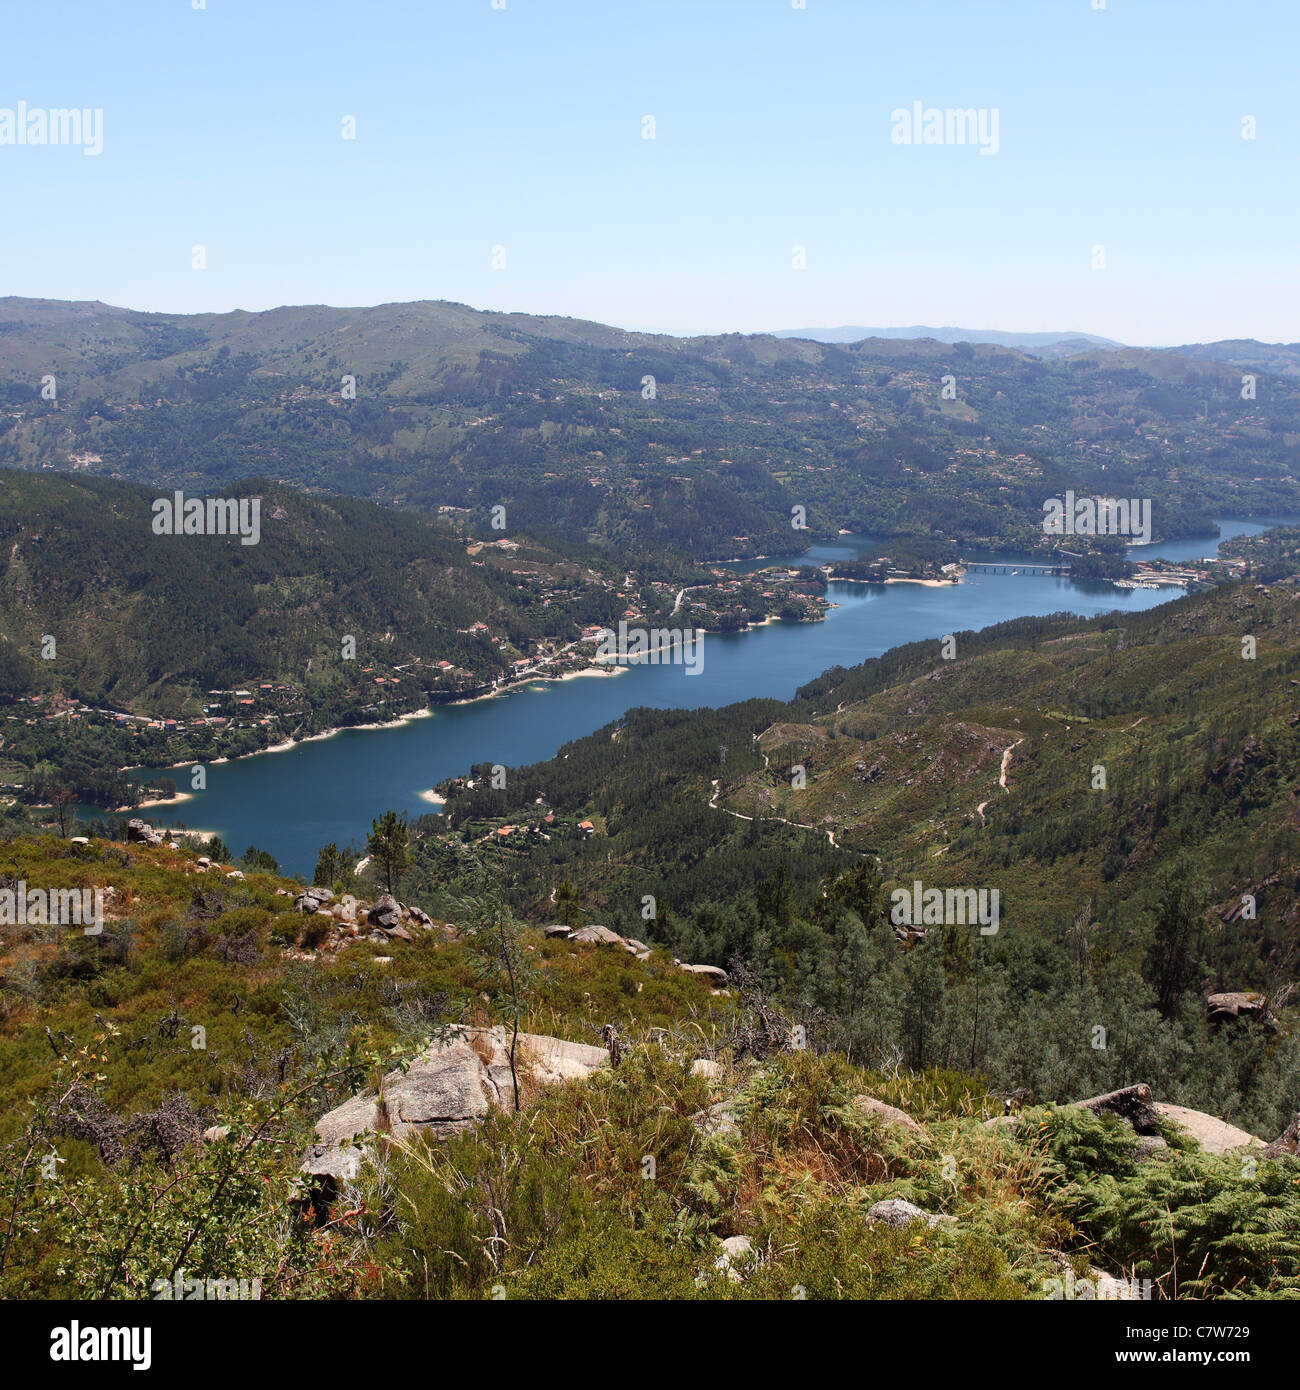 A view of the lake formed by the Canicada reservoir in northern Portugal. Stock Photo